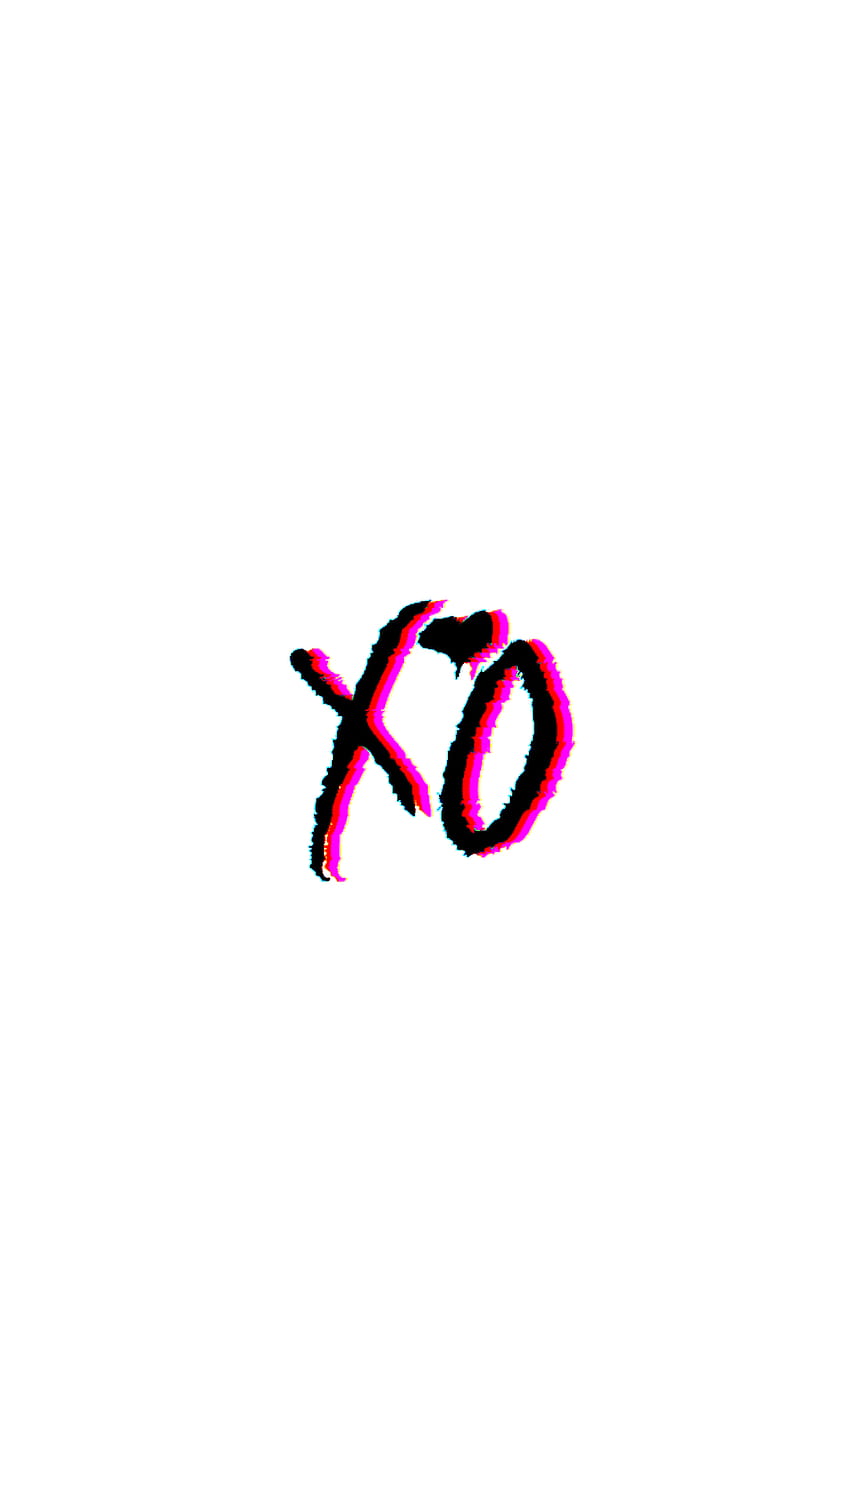 XO  The Weeknd  Wallpaper  The weeknd wallpaper iphone Music wallpaper The  weeknd poster